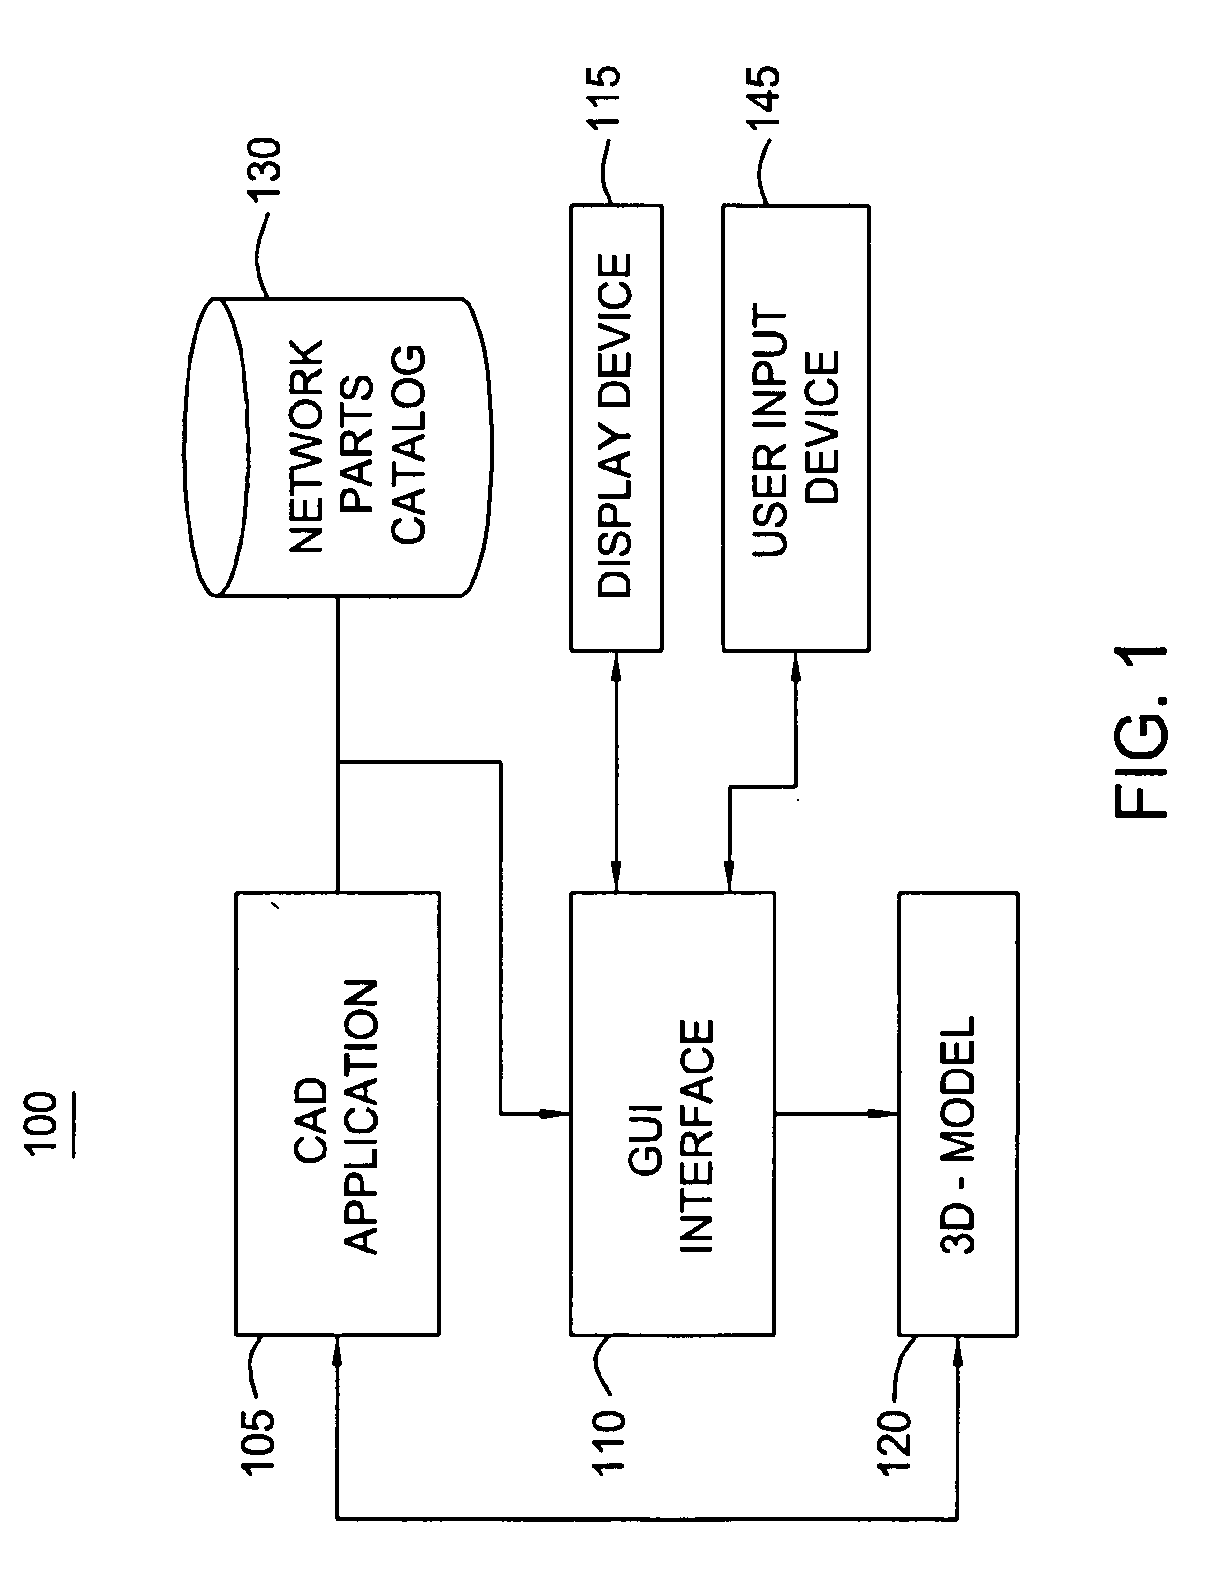 Method for dynamically generating multiple views of three-dimensional models for utility networks